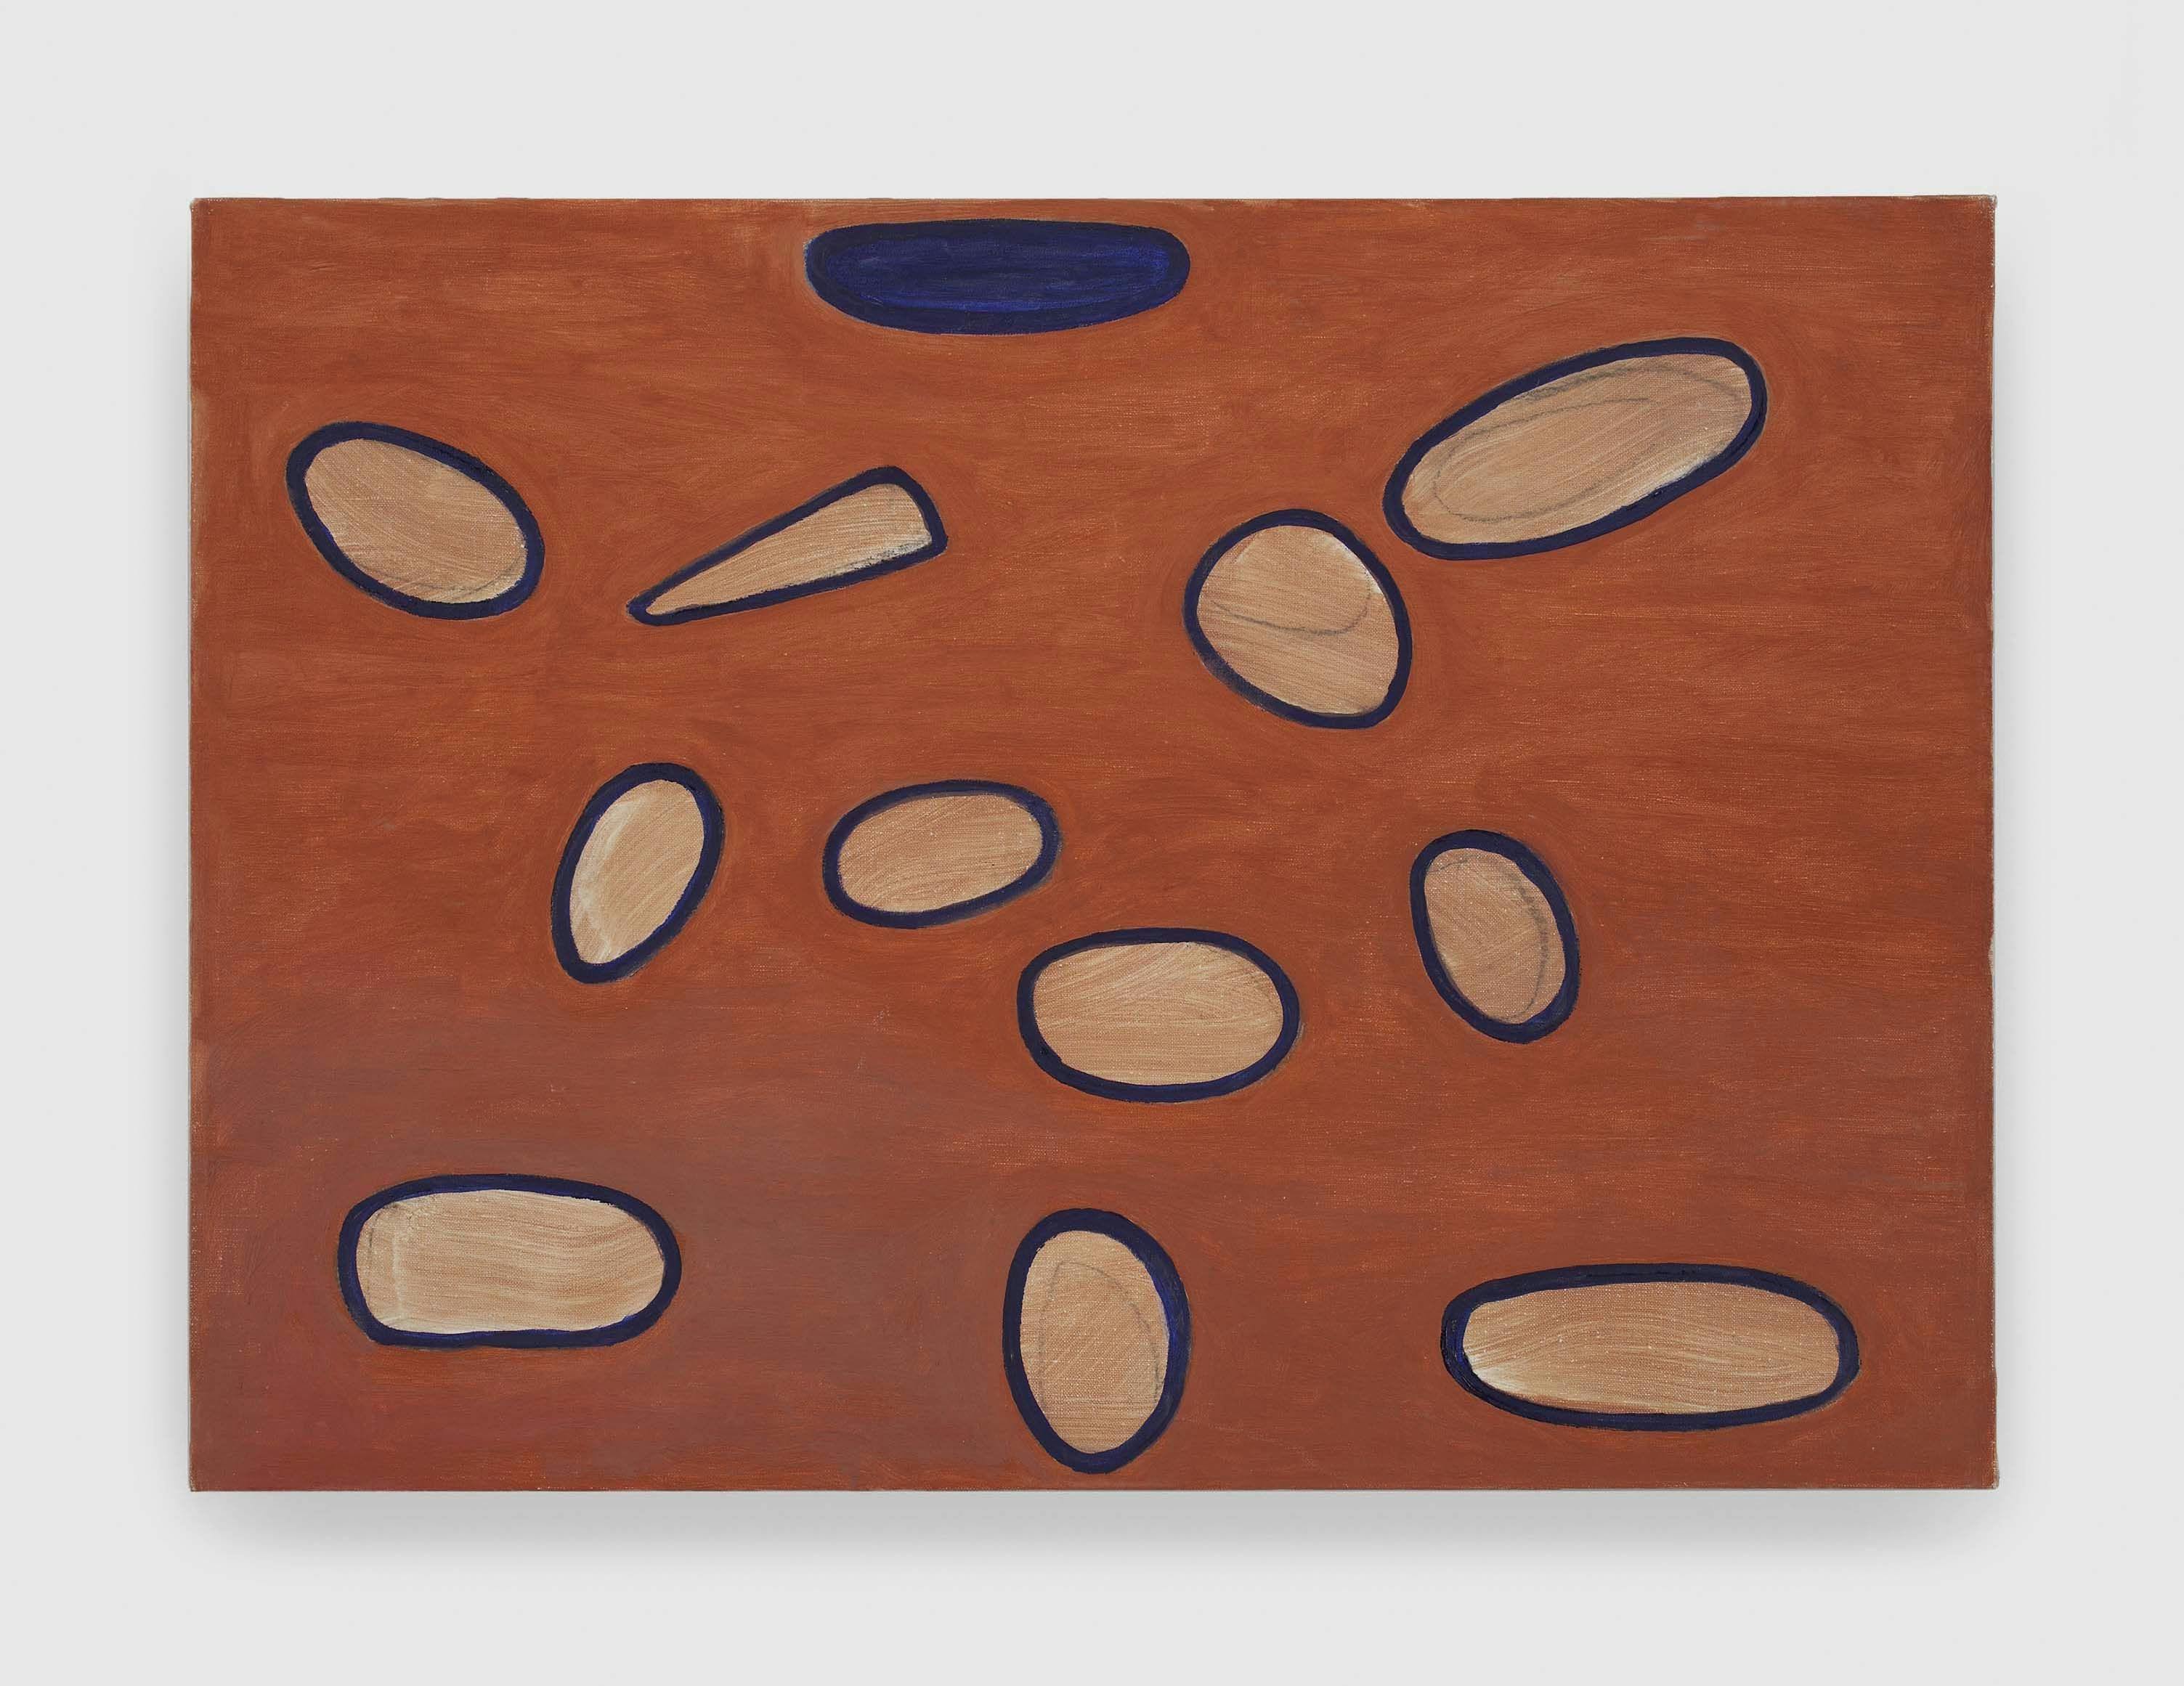 A painting by Raoul De Keyser, titled Across, dated in 2000 and 2009.